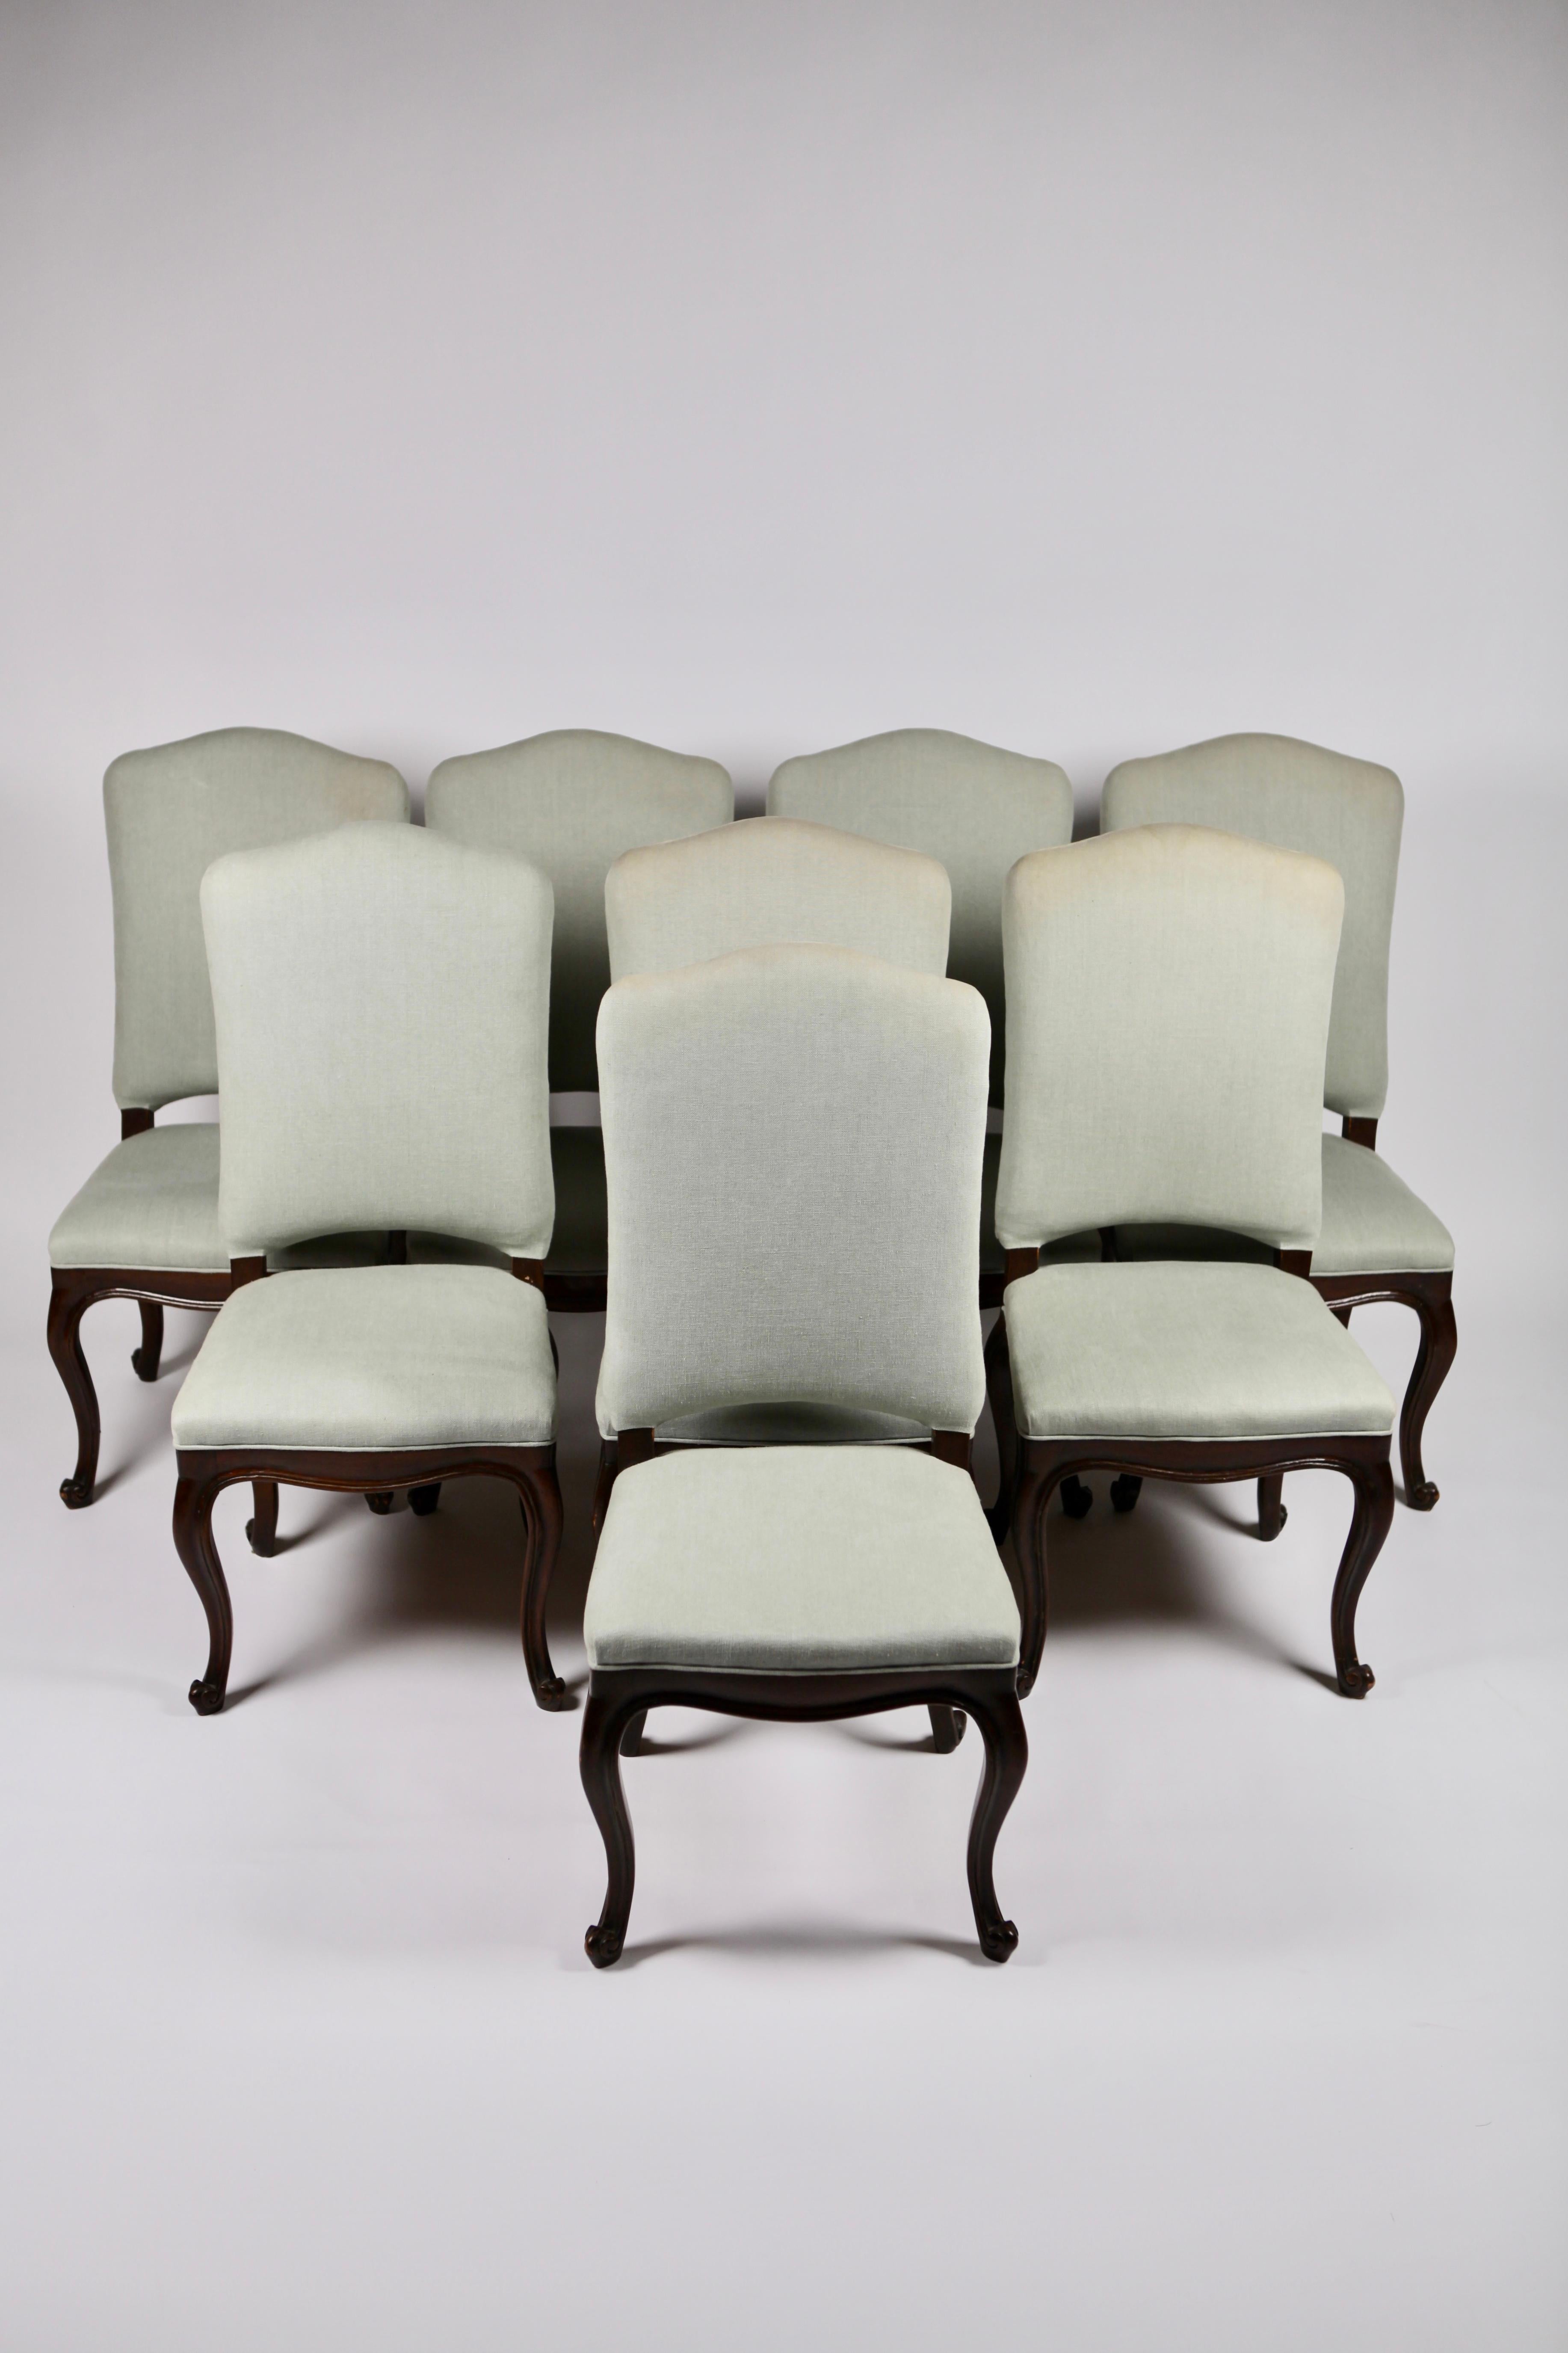 An elegant set of 8 North Italian walnut and Celadon linen upholstered dining chairs, Louis XV style.
Stained walnut.
8 additional seat cushions in the same fabric included, not pictured.
The linen with some signs of usage.
  